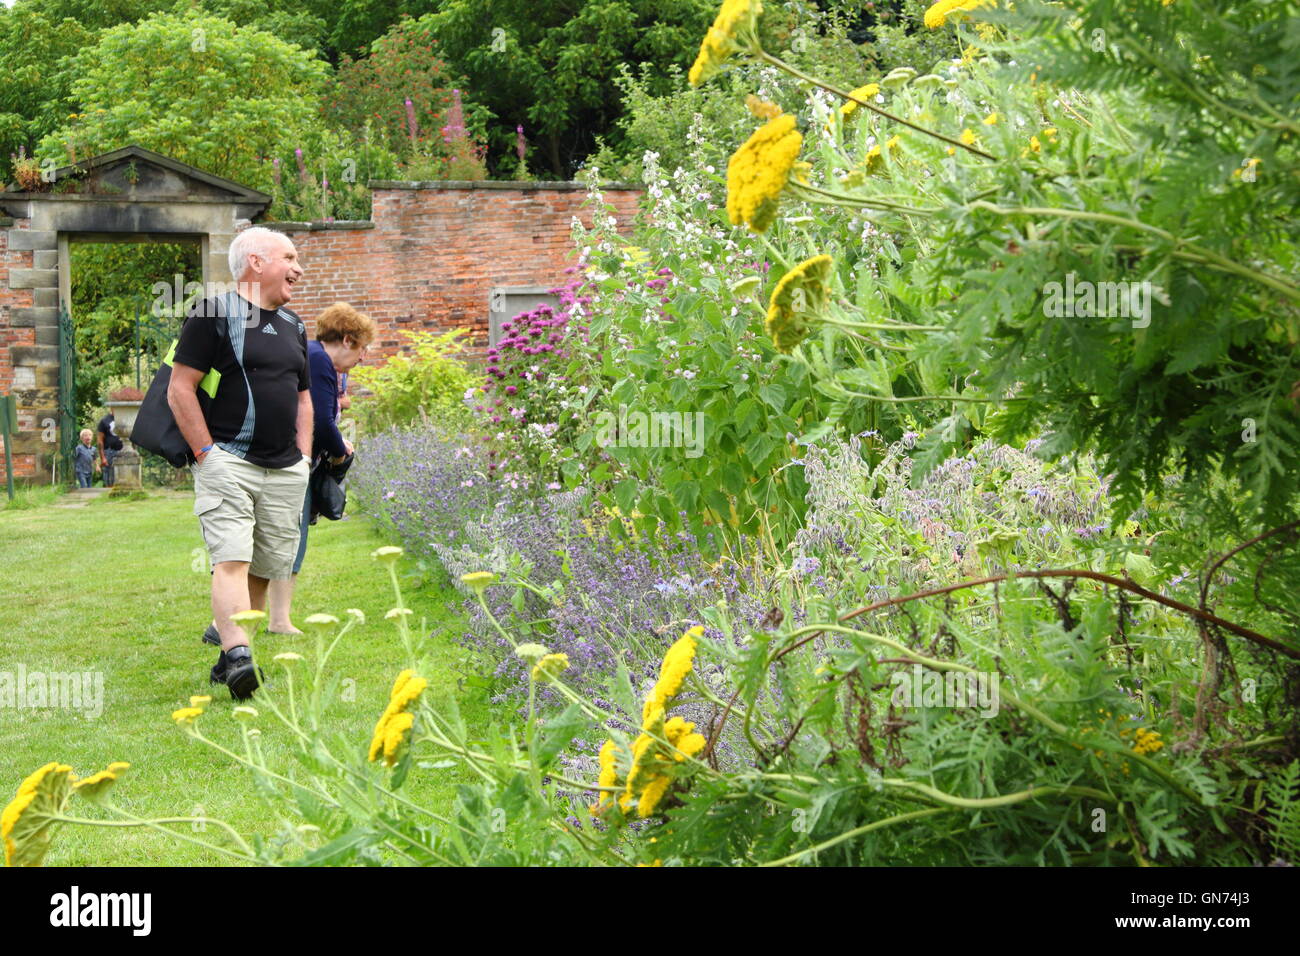 A herbaceous border in full bloom at Wortley Hall Walled Garden day during an open day event, Sheffield, Yorkshire UK Stock Photo